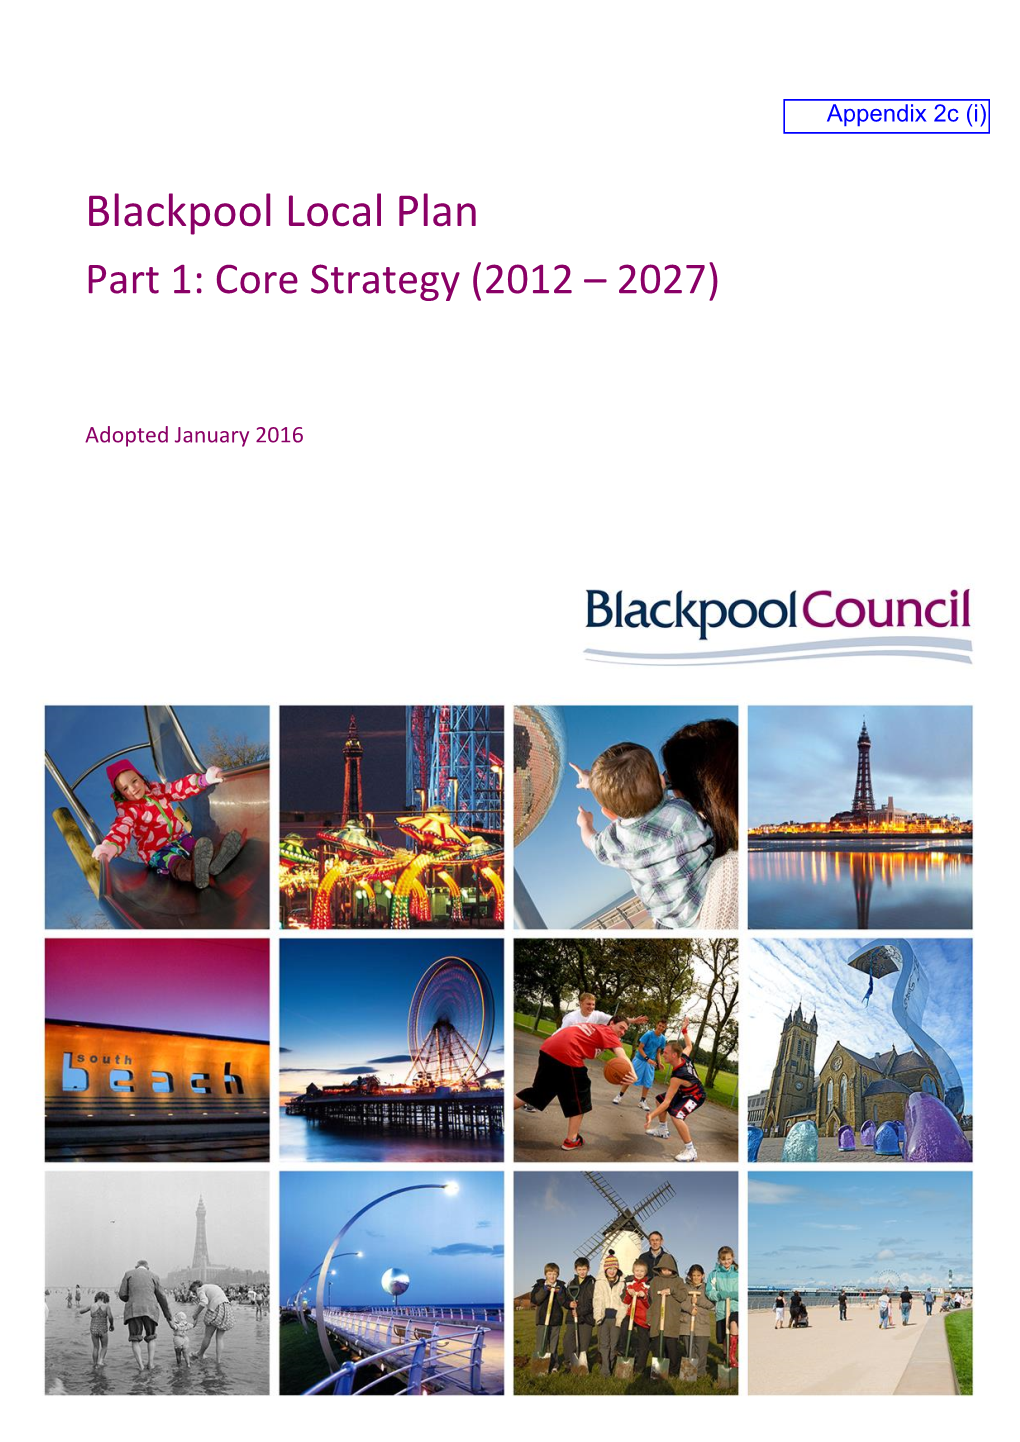 Blackpool Local Plan Part 1: Core Strategy (2012 – 2027)